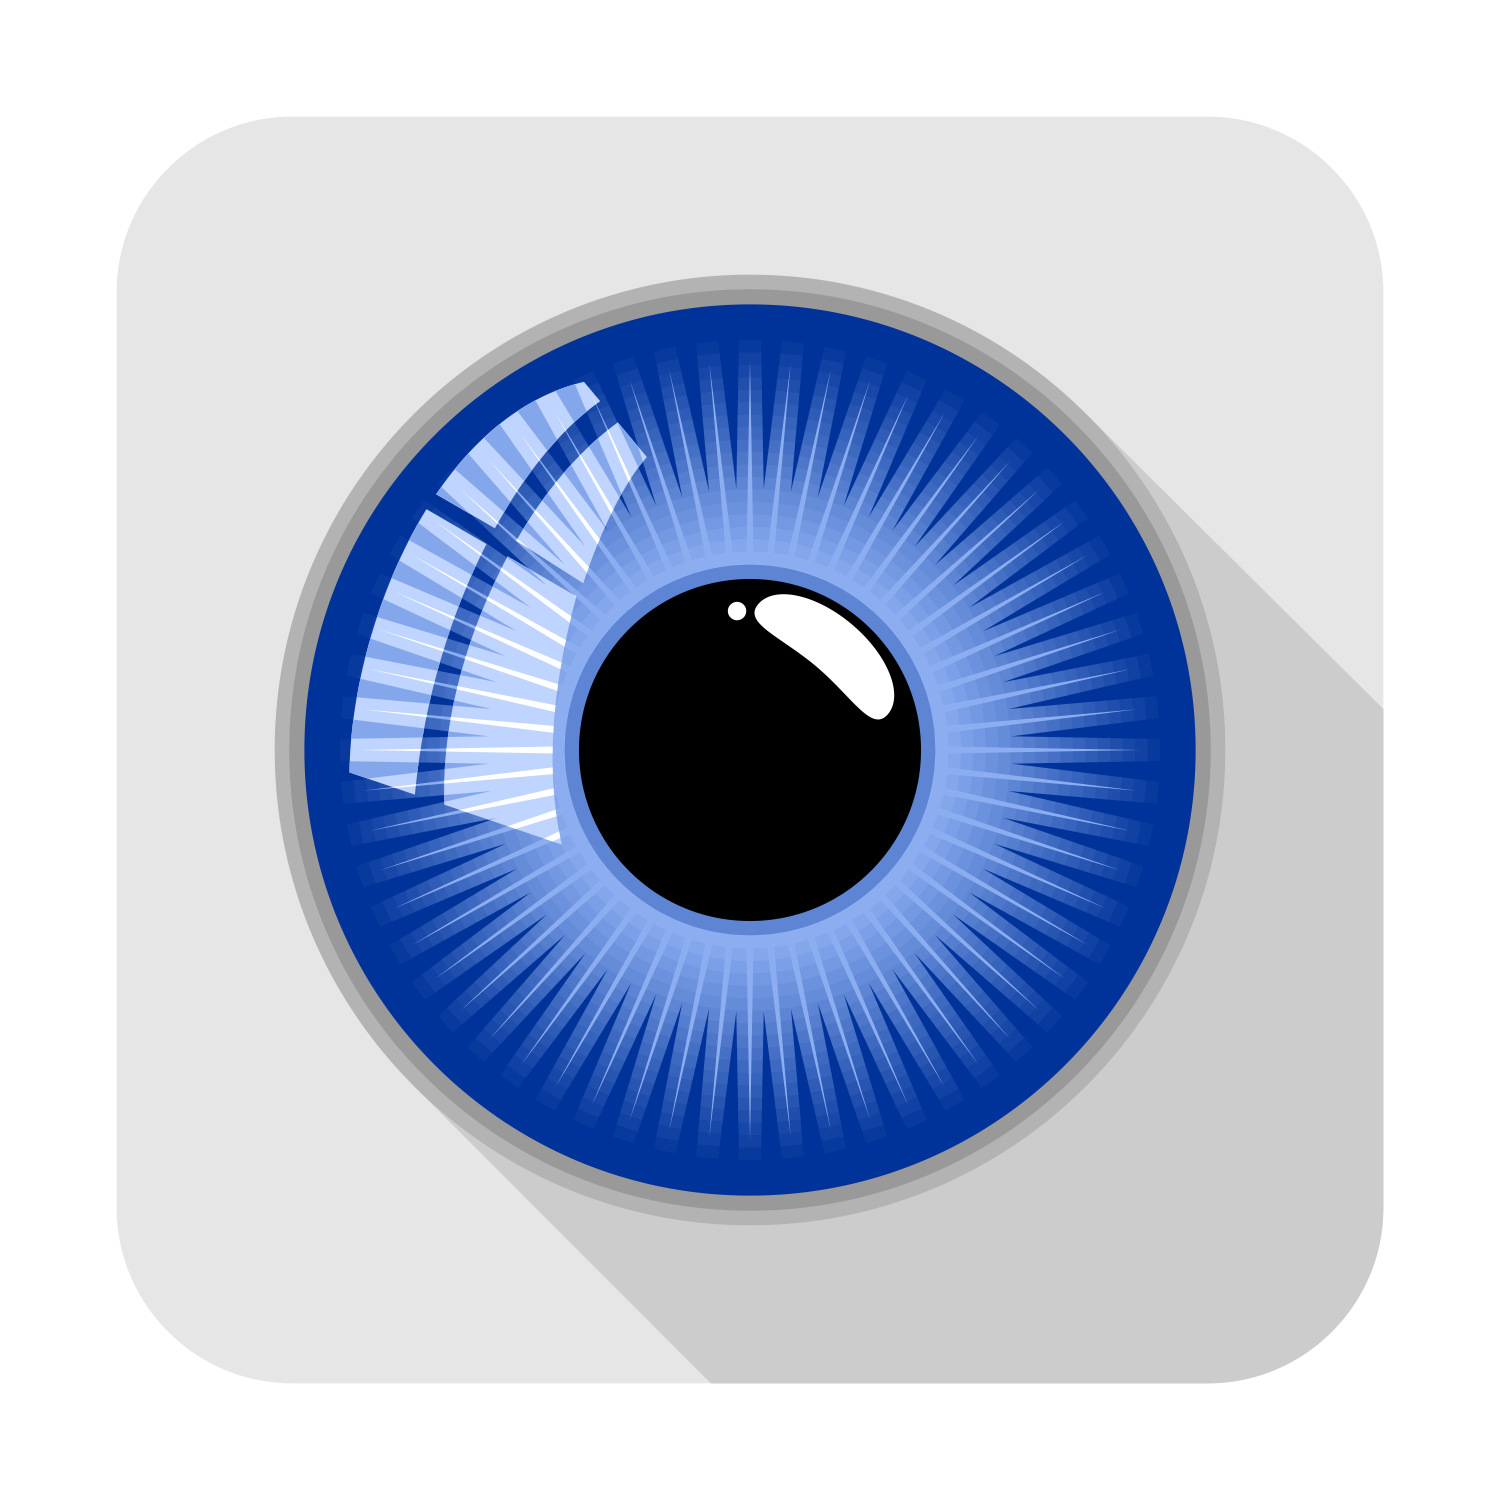 Download Vector for free use: Eye icon